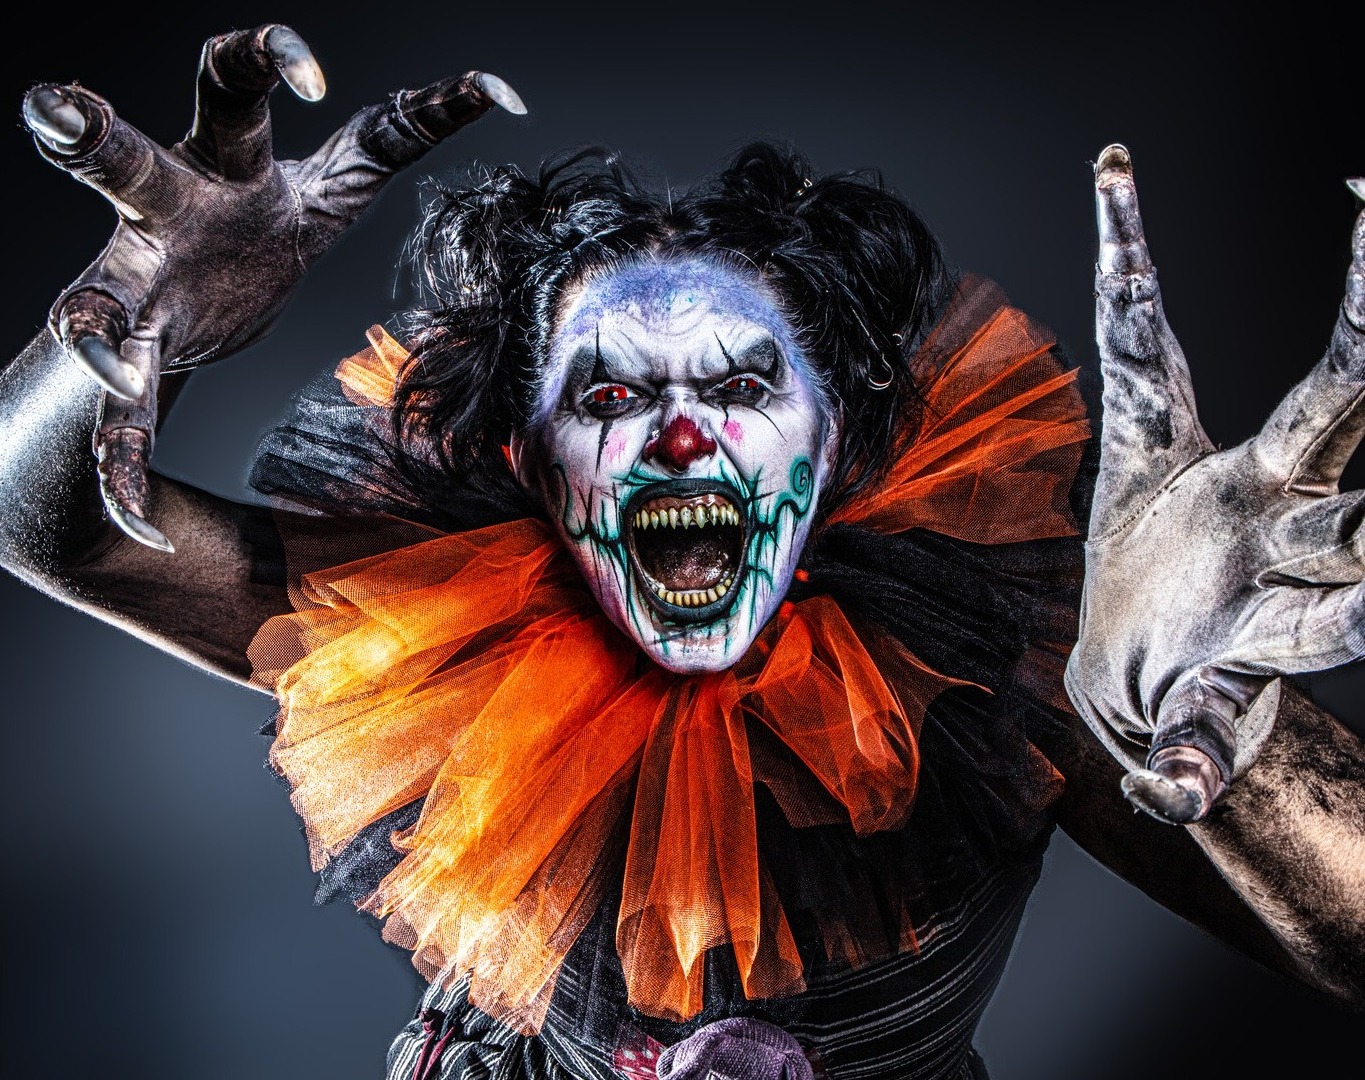 Fright Nights at the South Florida Fairgrounds